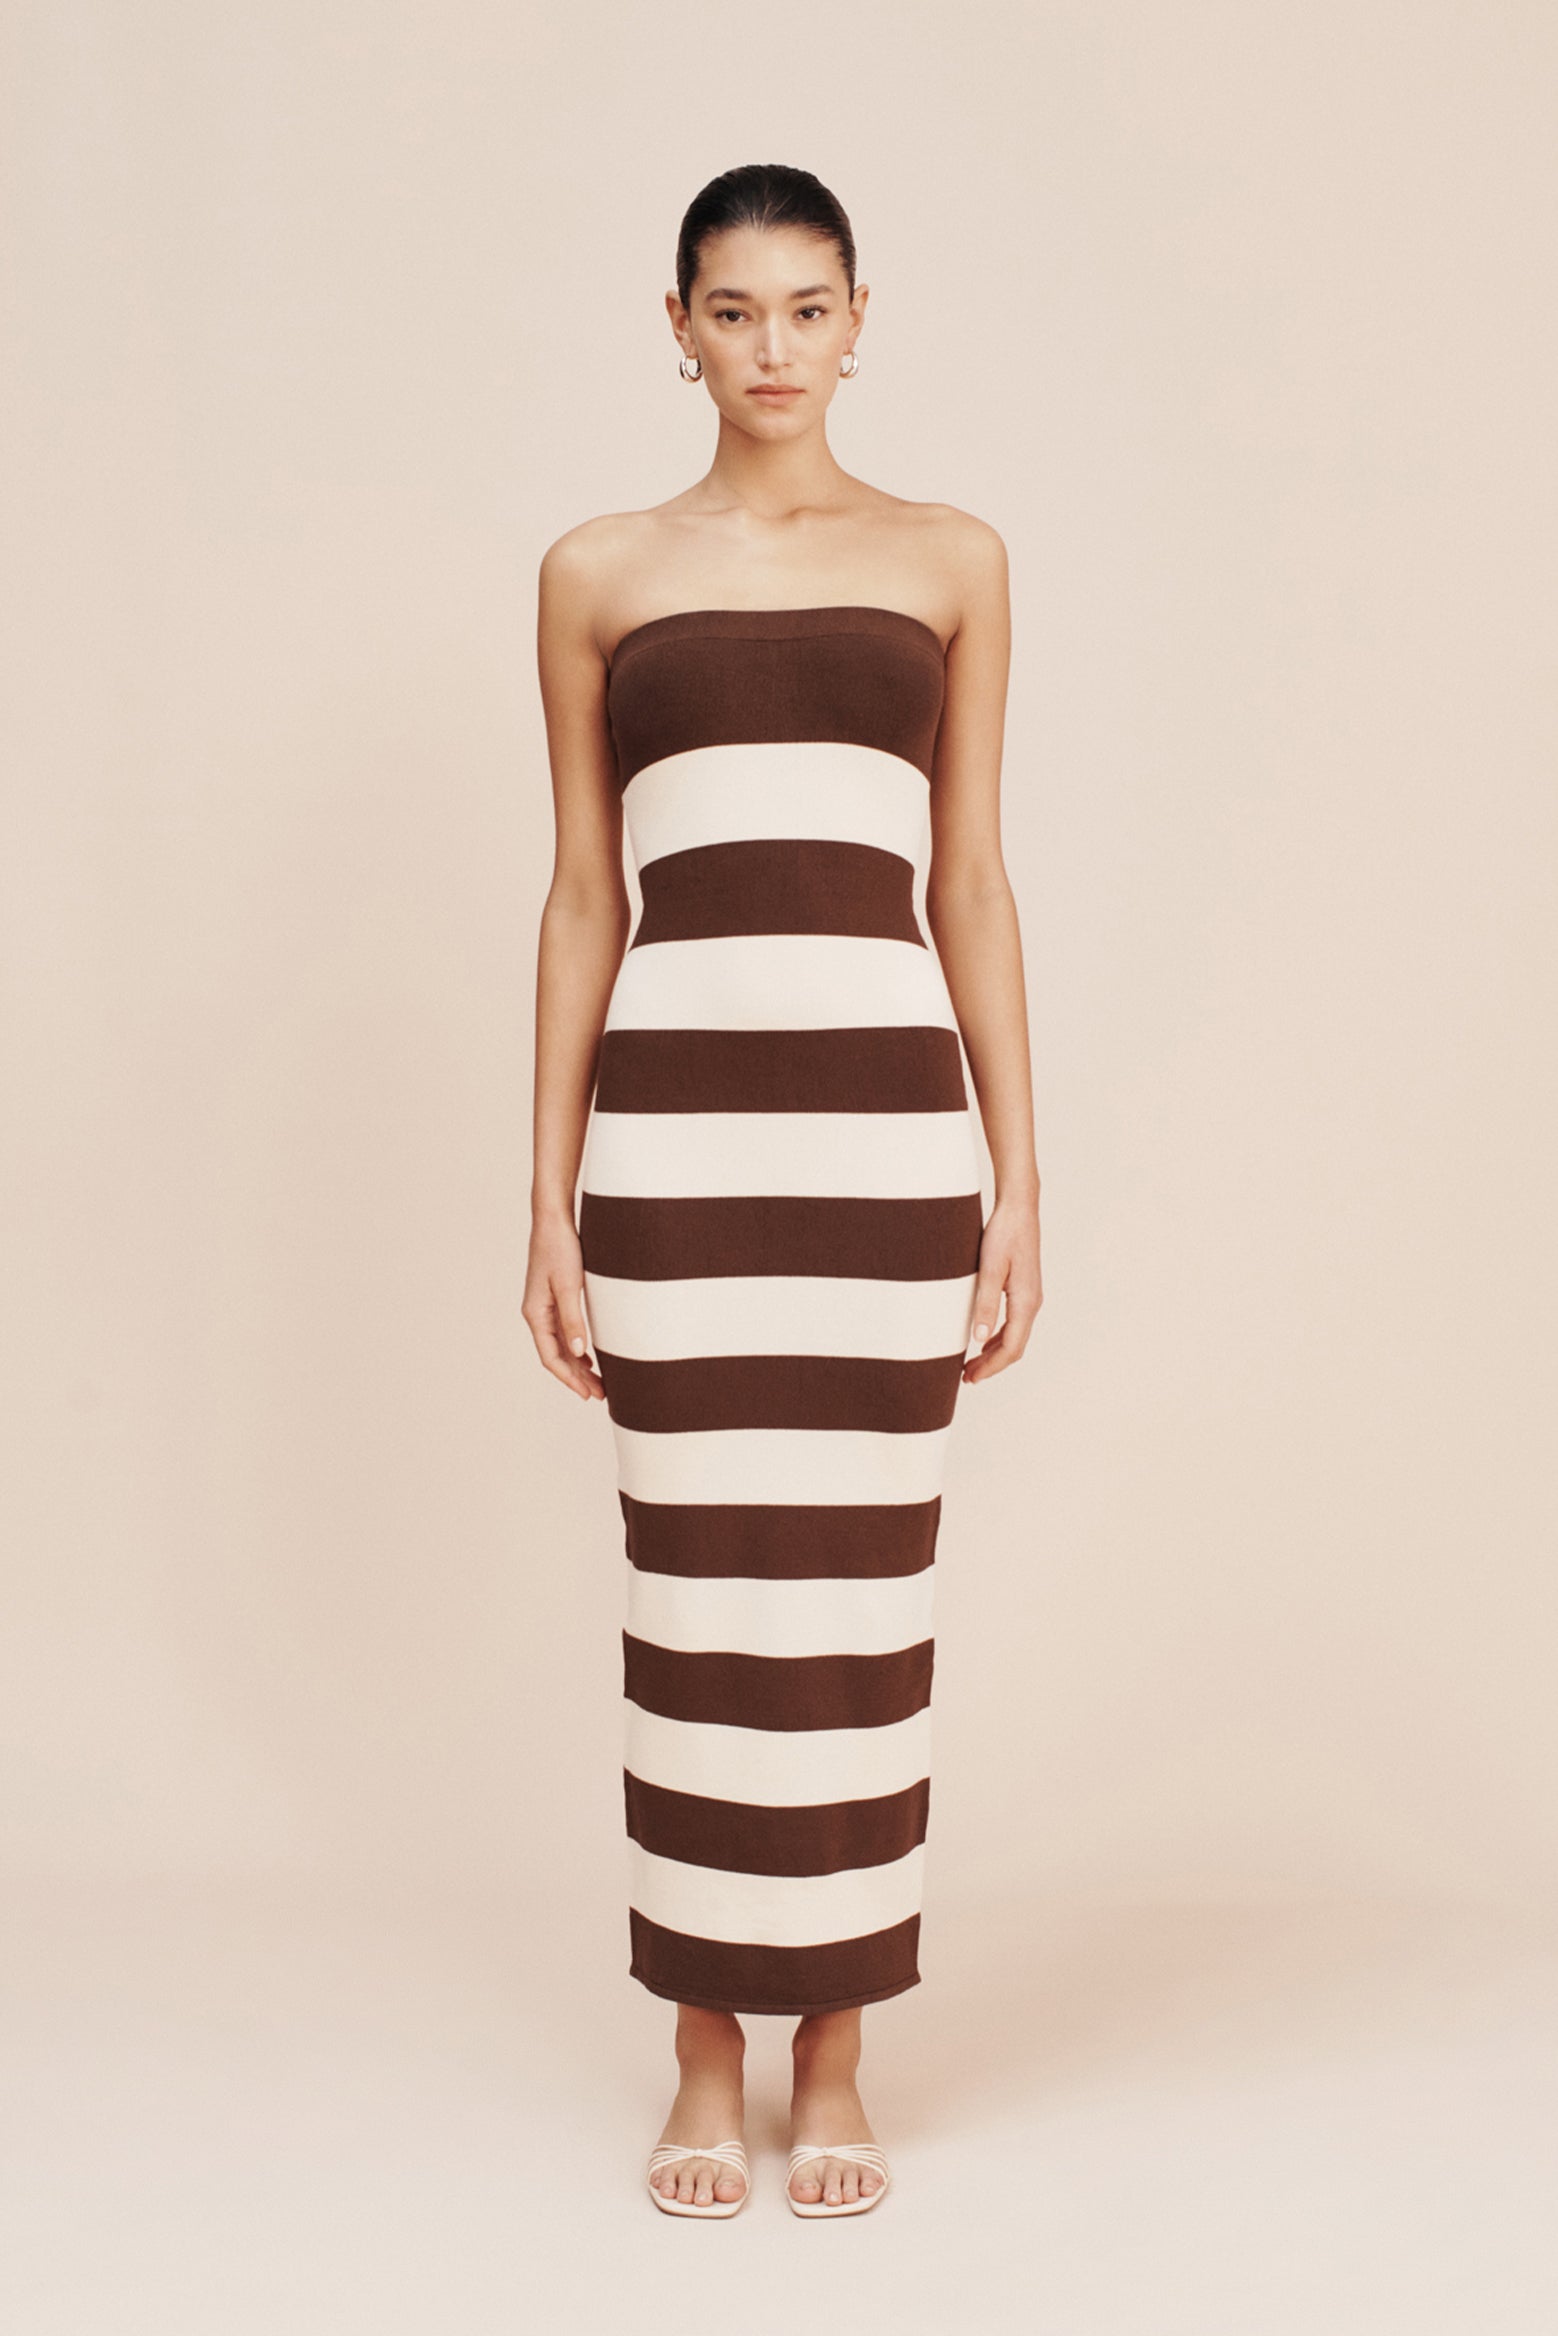 POSSE Theo Maxi Dress in Chocolate/Cream available at The New Trend Australia.